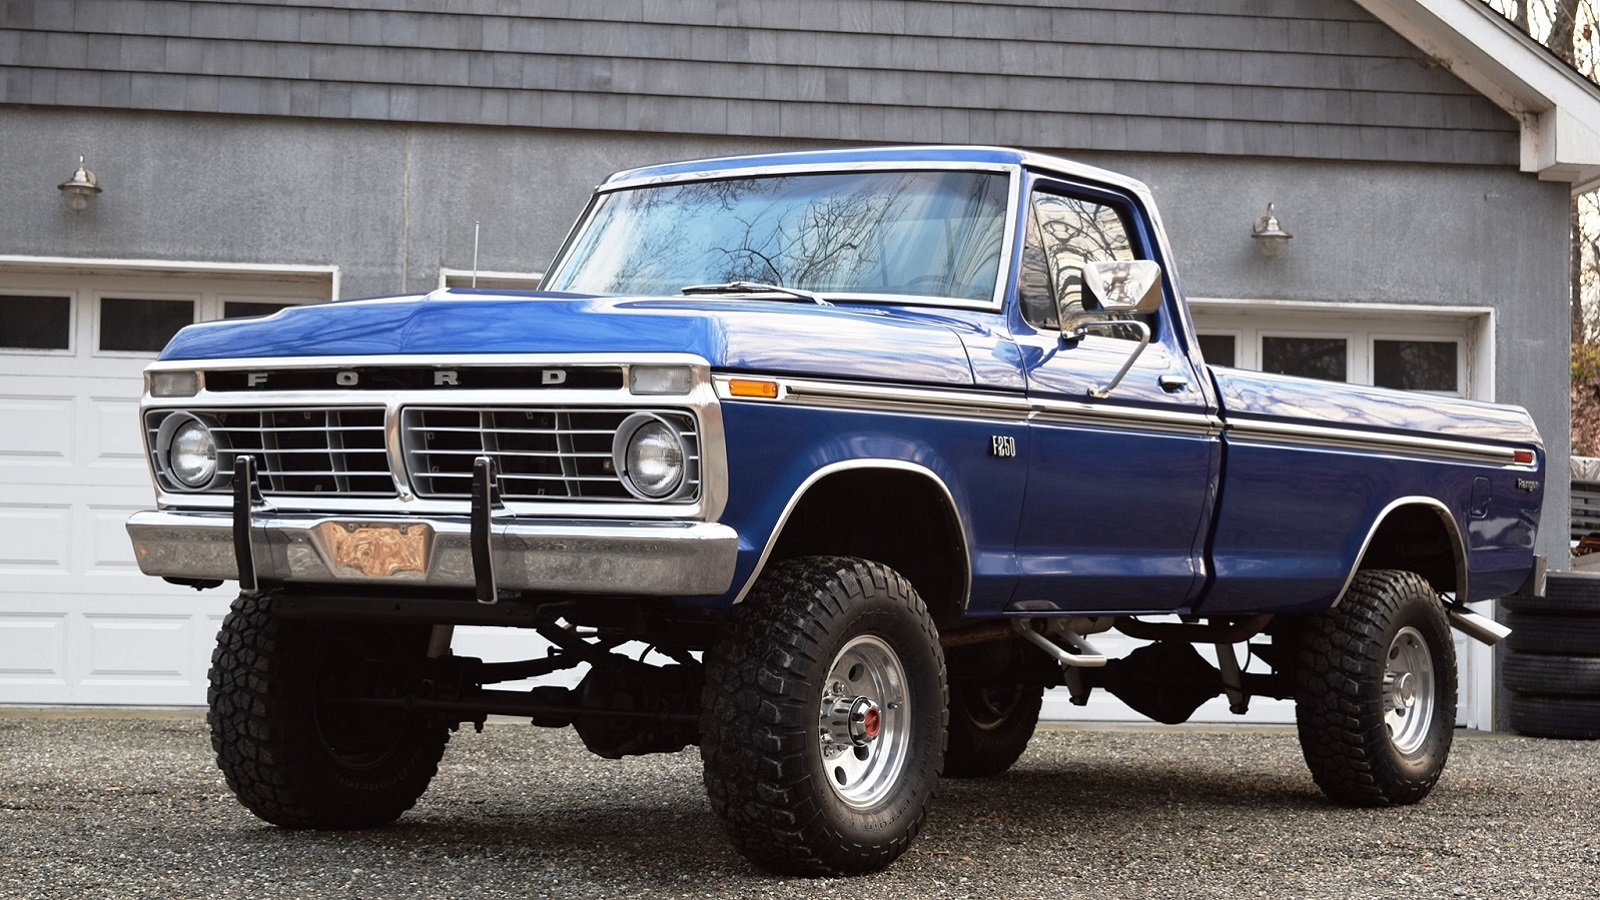 Ford Highboy 1974 250 Trucks Perfection Pure Truck.